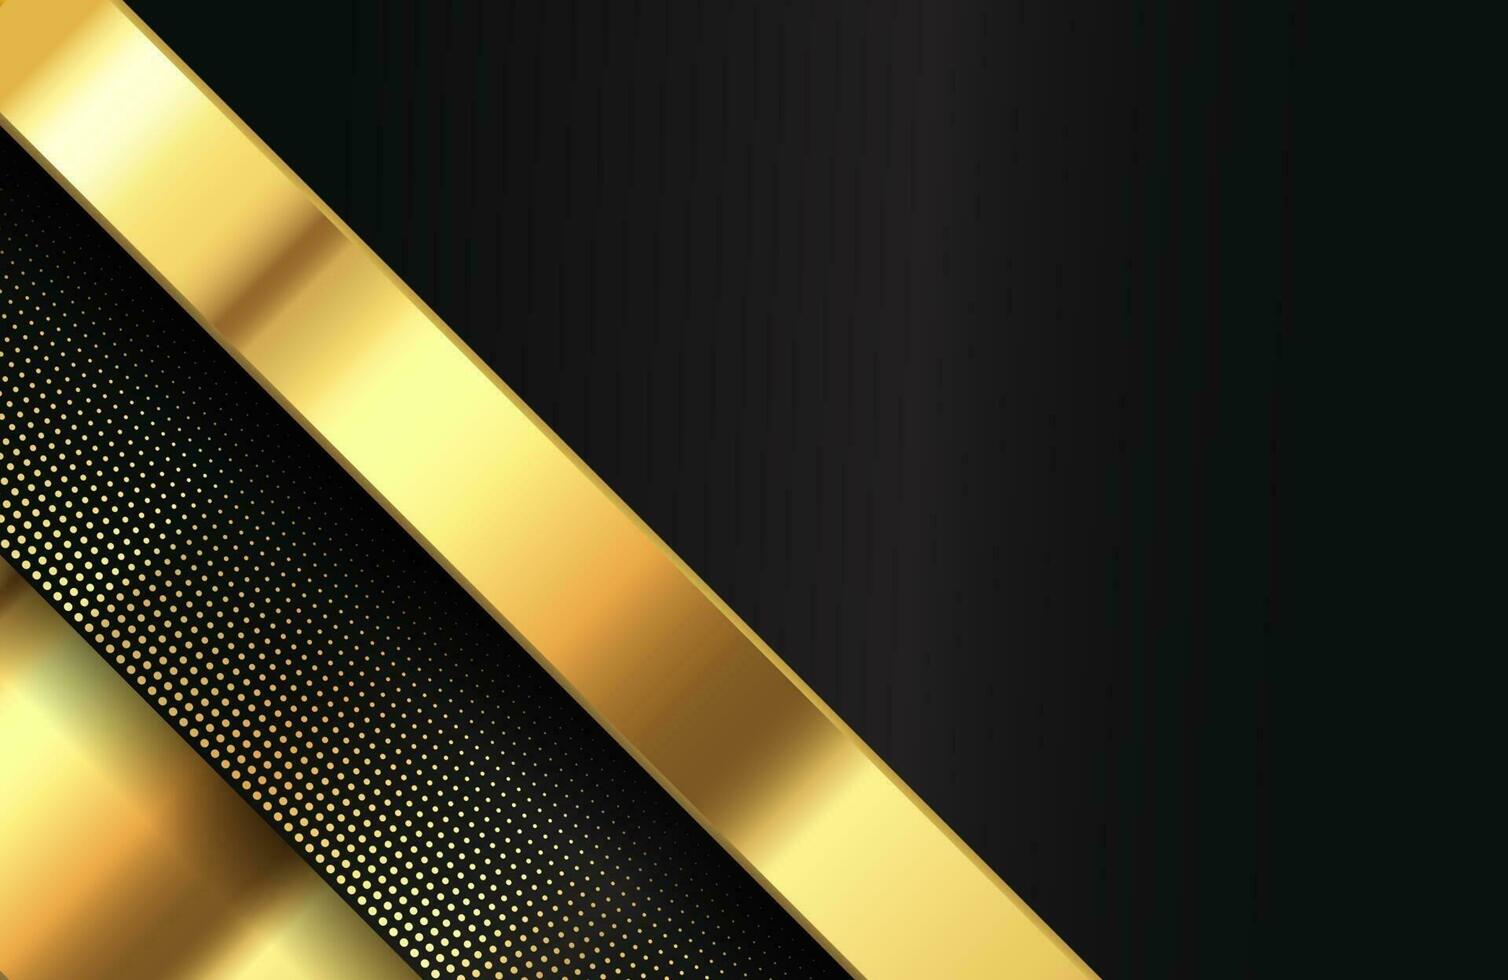 Geometric 3d background with glossy gold element Vector geometric illustration of golden shapes textured with golden glittering dots